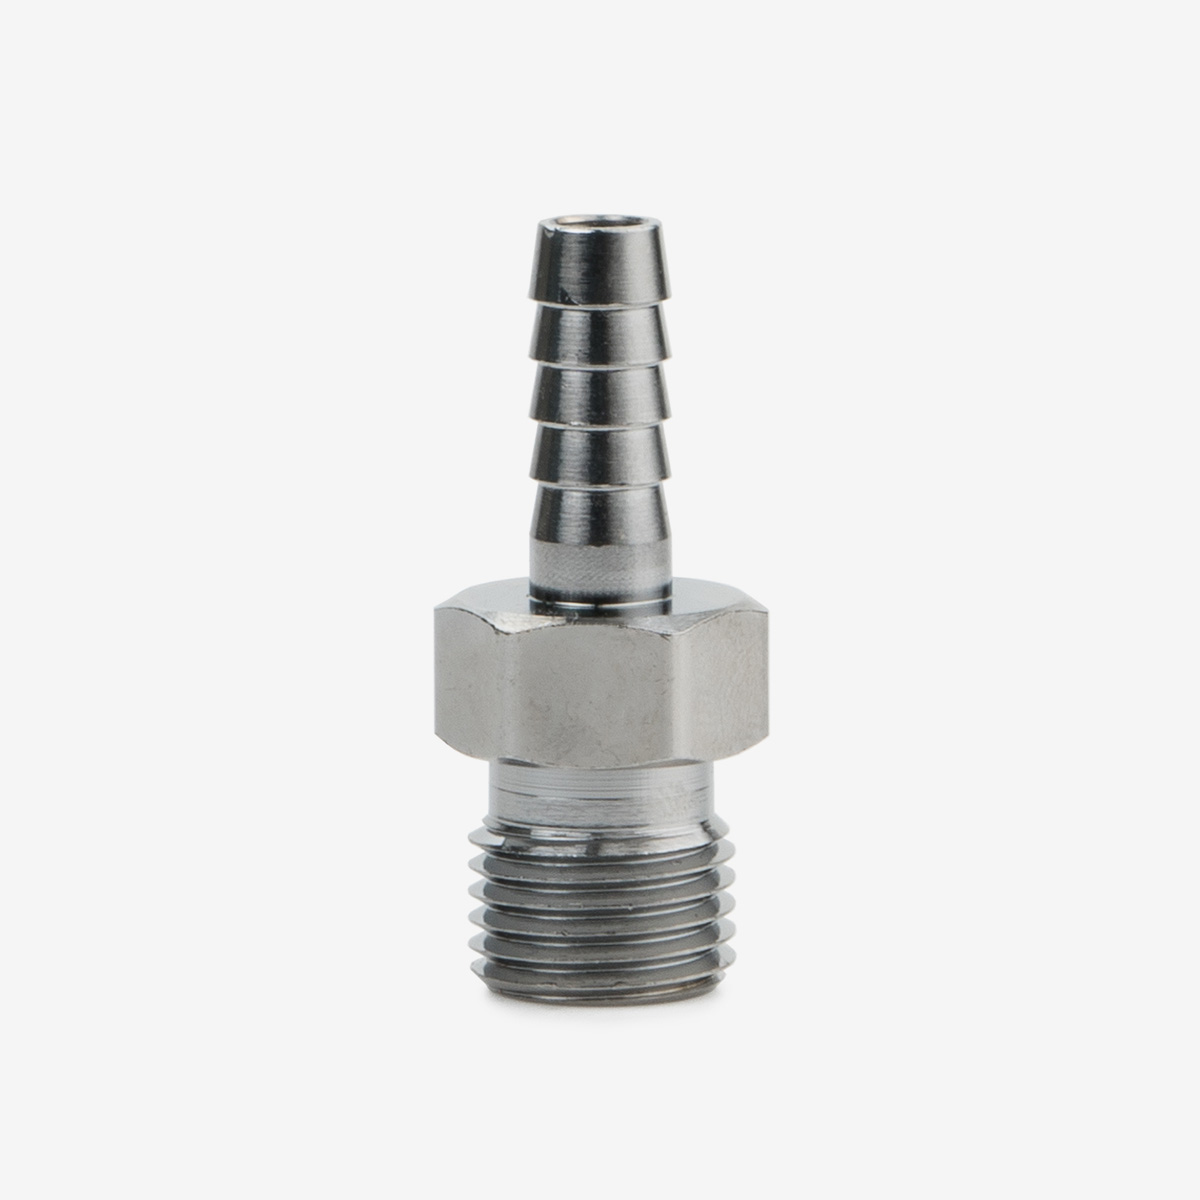 Silver Oxygen hex nut DISS fitting on white background